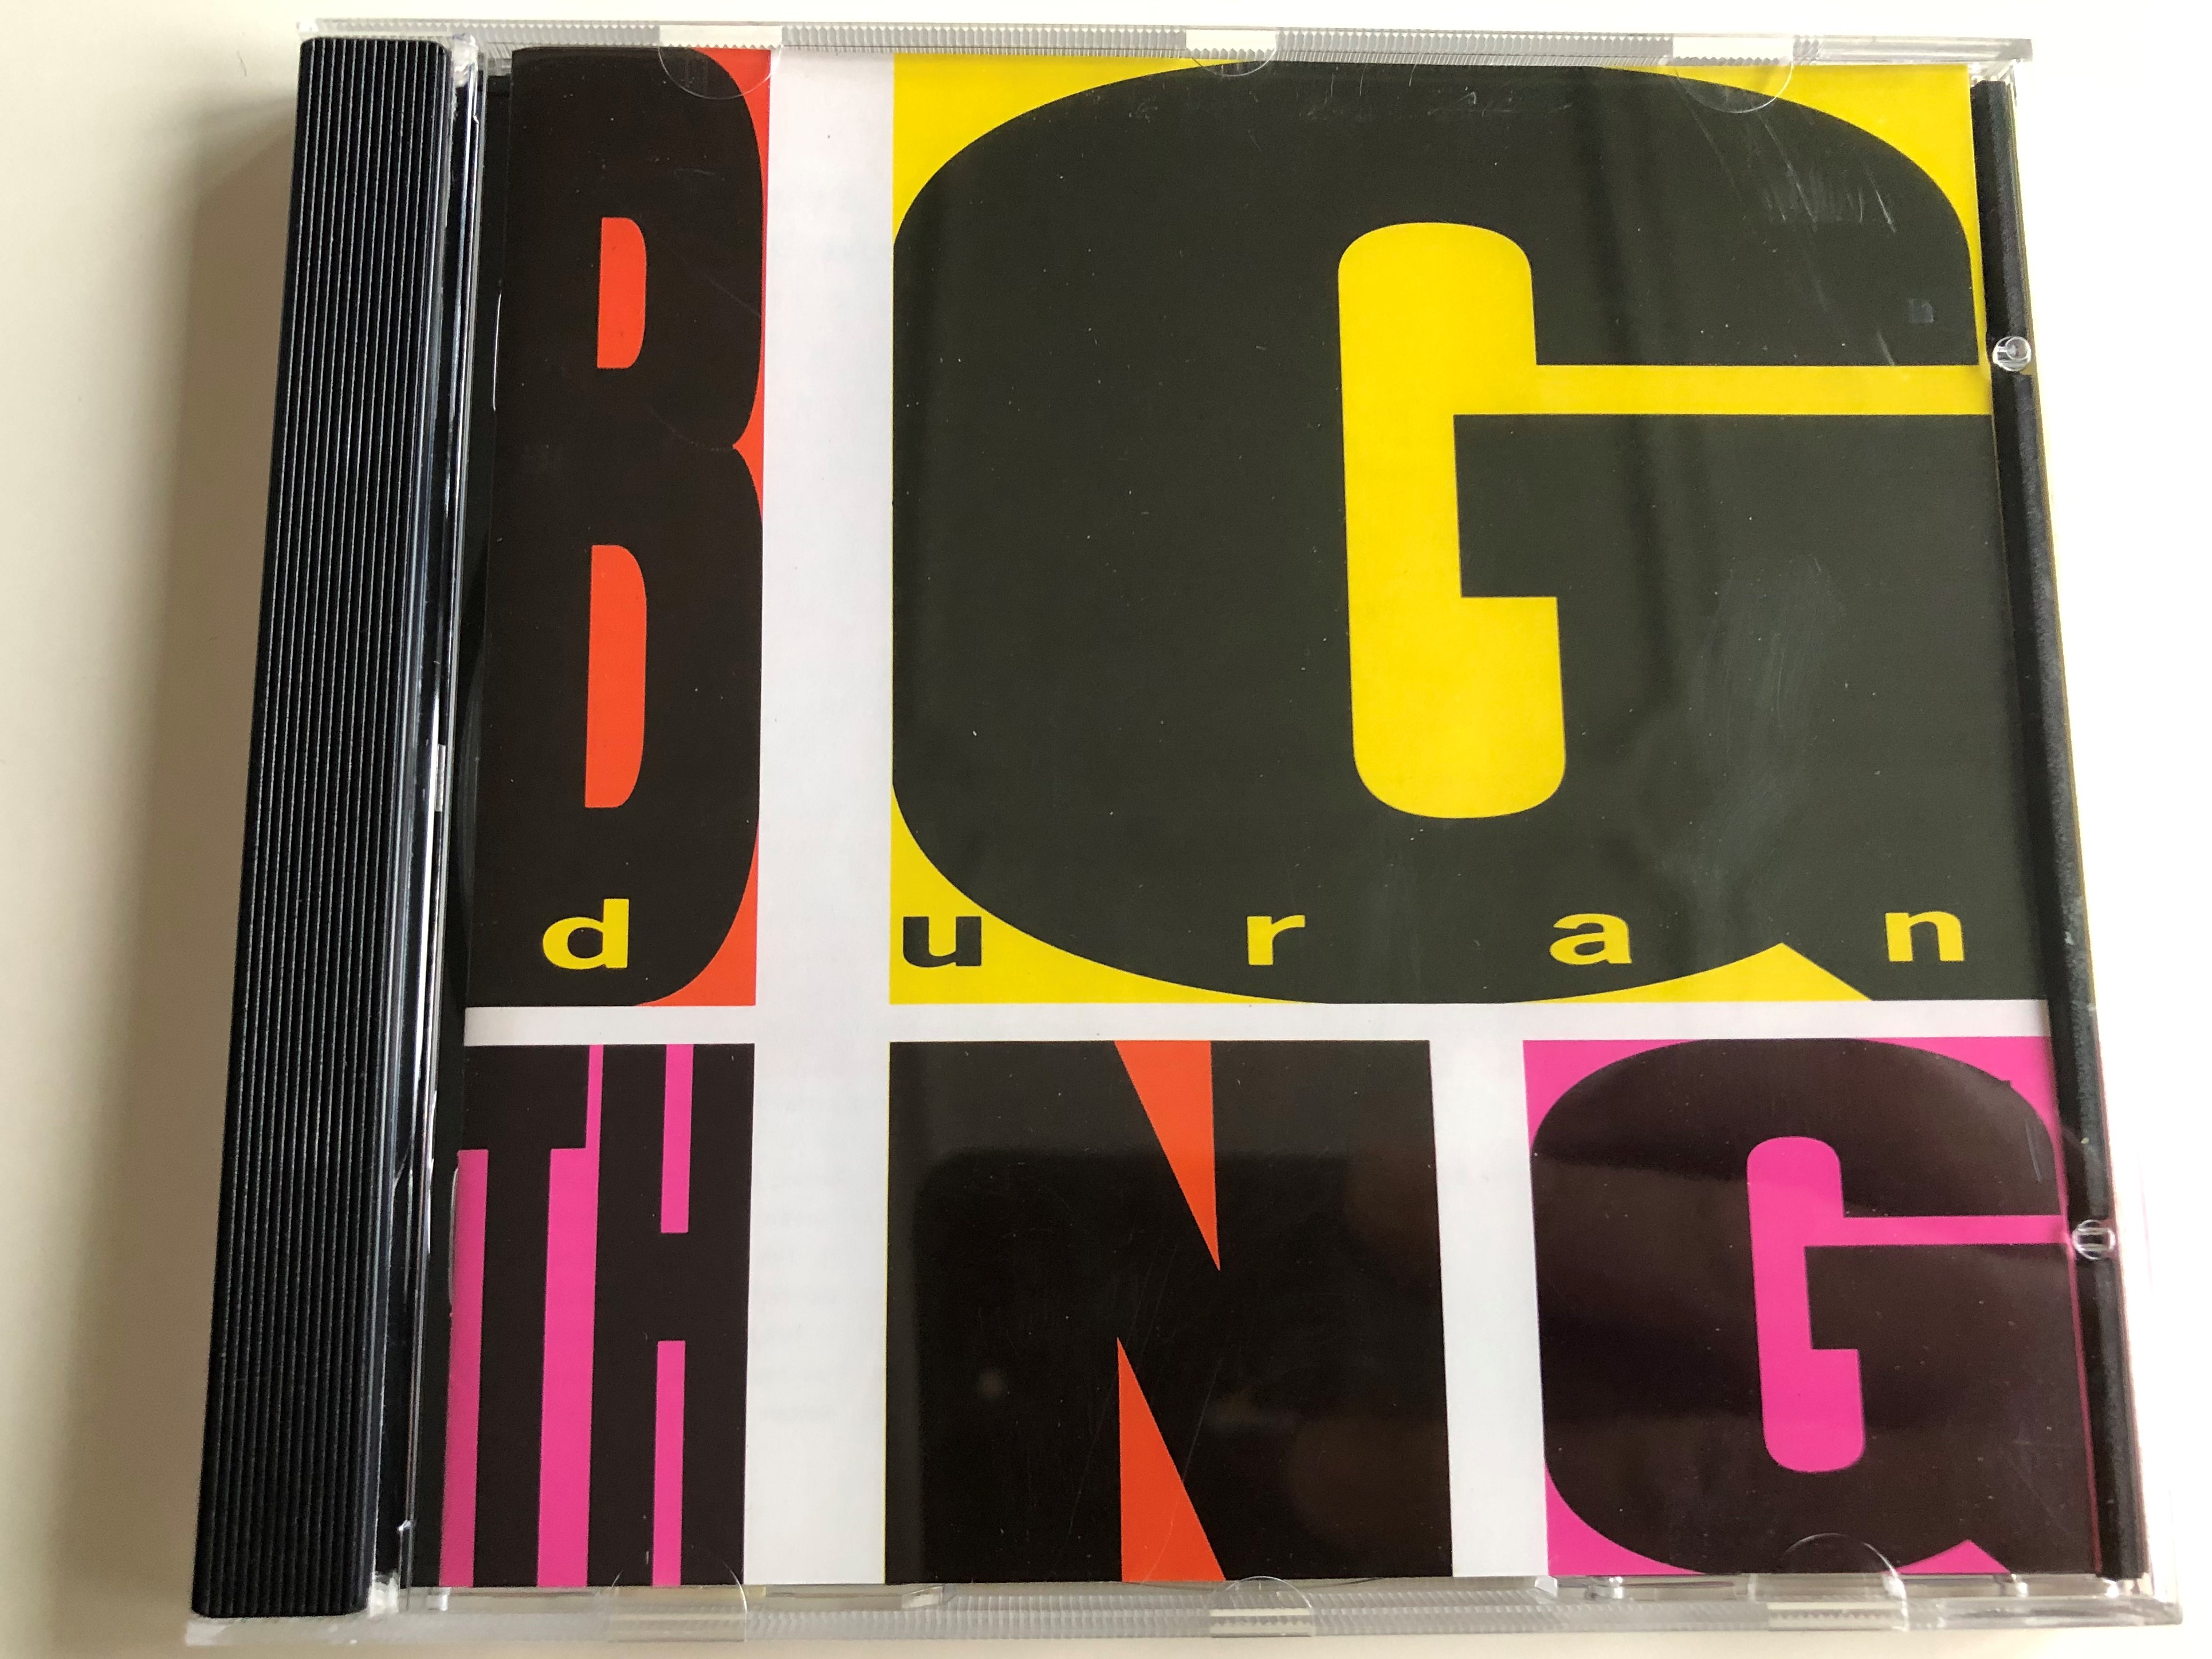 duran-duran-big-thing-too-late-marlene-drug-do-you-believe-in-shame-the-edge-of-america-cdprg-1007-audio-cd-recording-from-1988-emi-records-1-.jpg